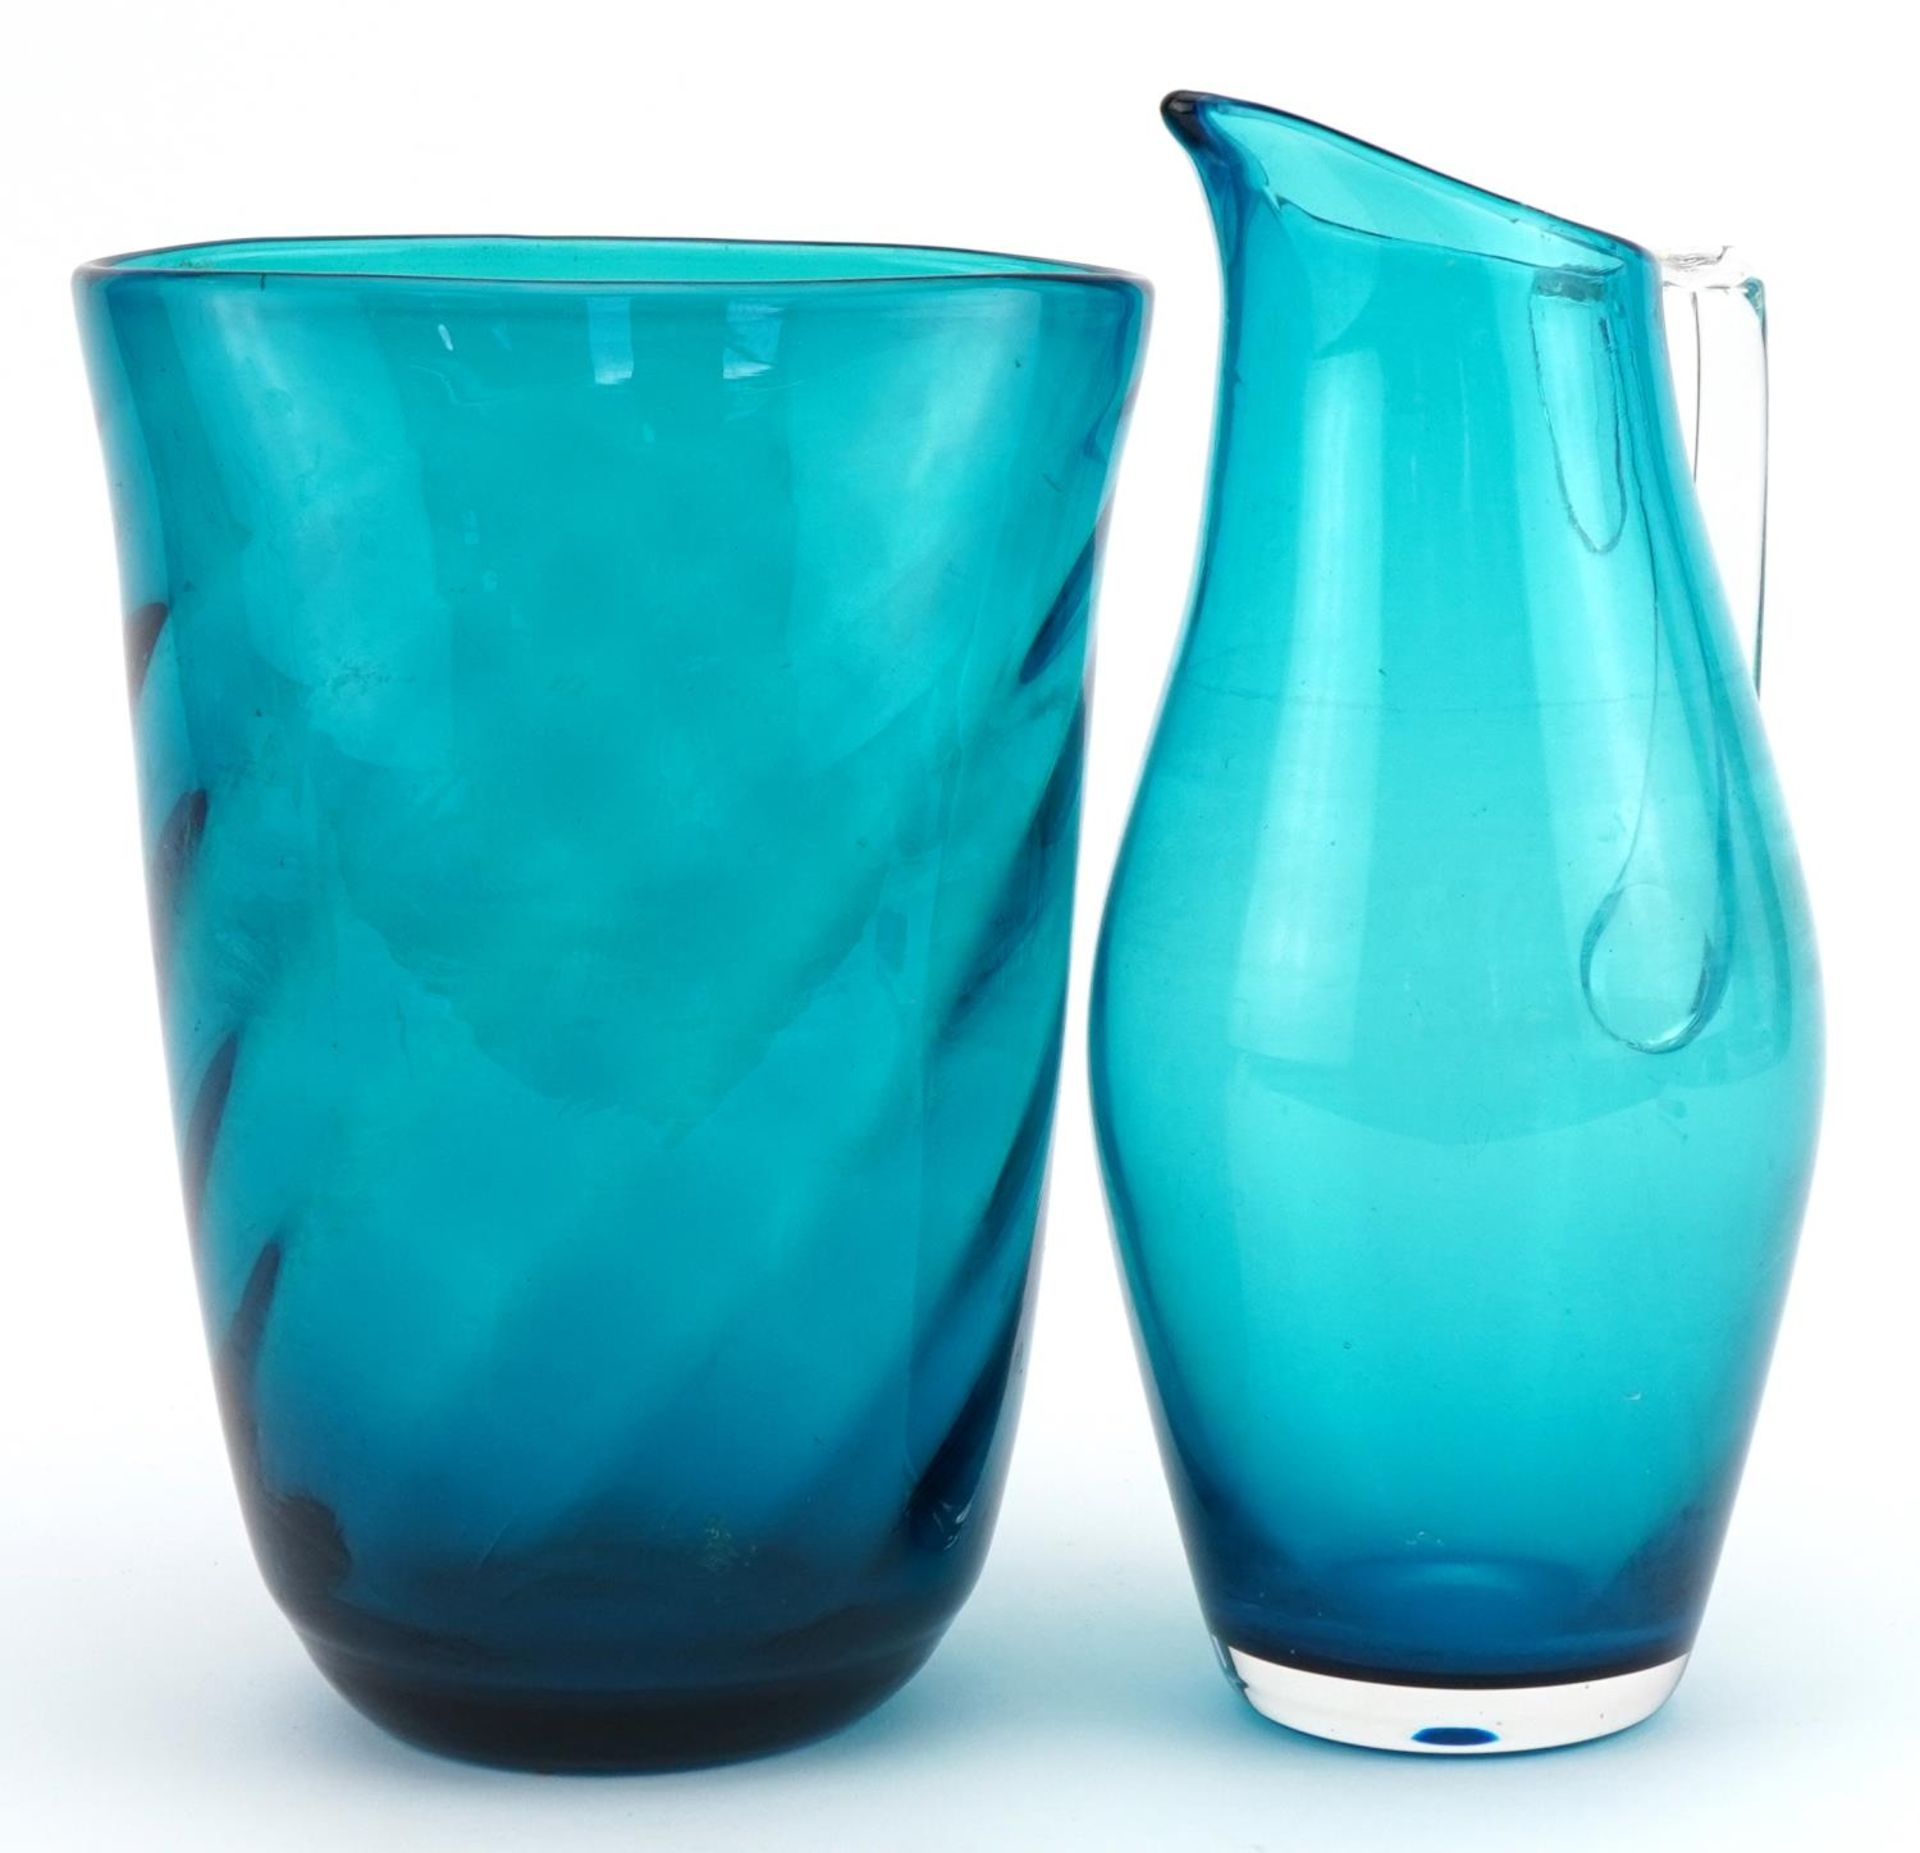 Whitefriars aqua blue glass jug and writhen vase, the largest 22cm high